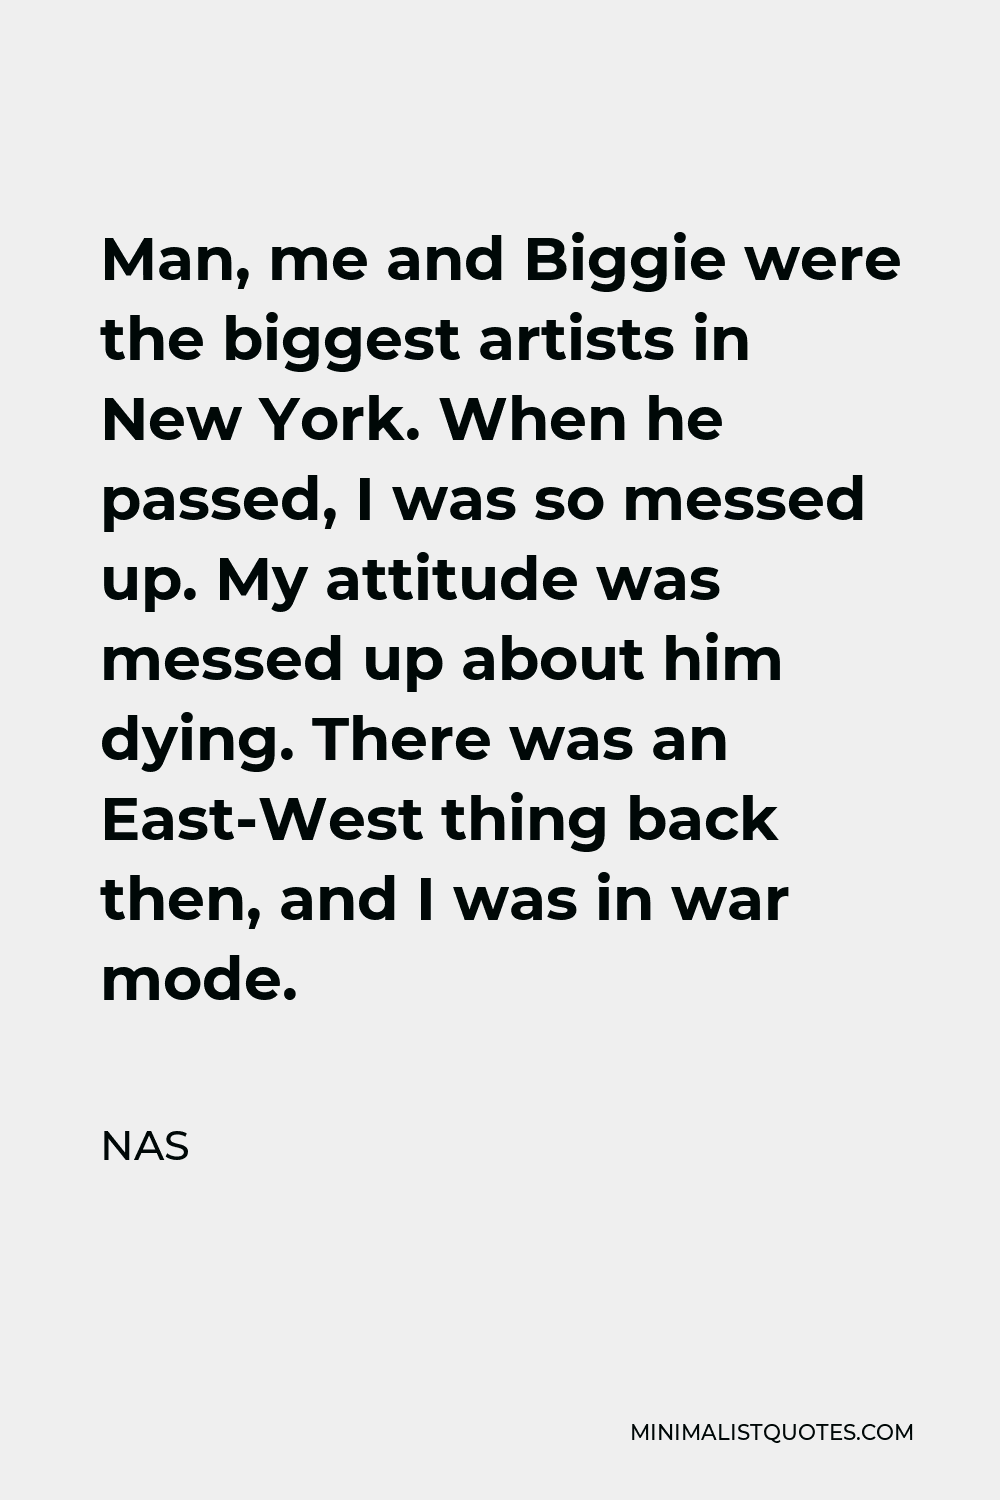 Nas Quote - Man, me and Biggie were the biggest artists in New York. When he passed, I was so messed up. My attitude was messed up about him dying. There was an East-West thing back then, and I was in war mode.